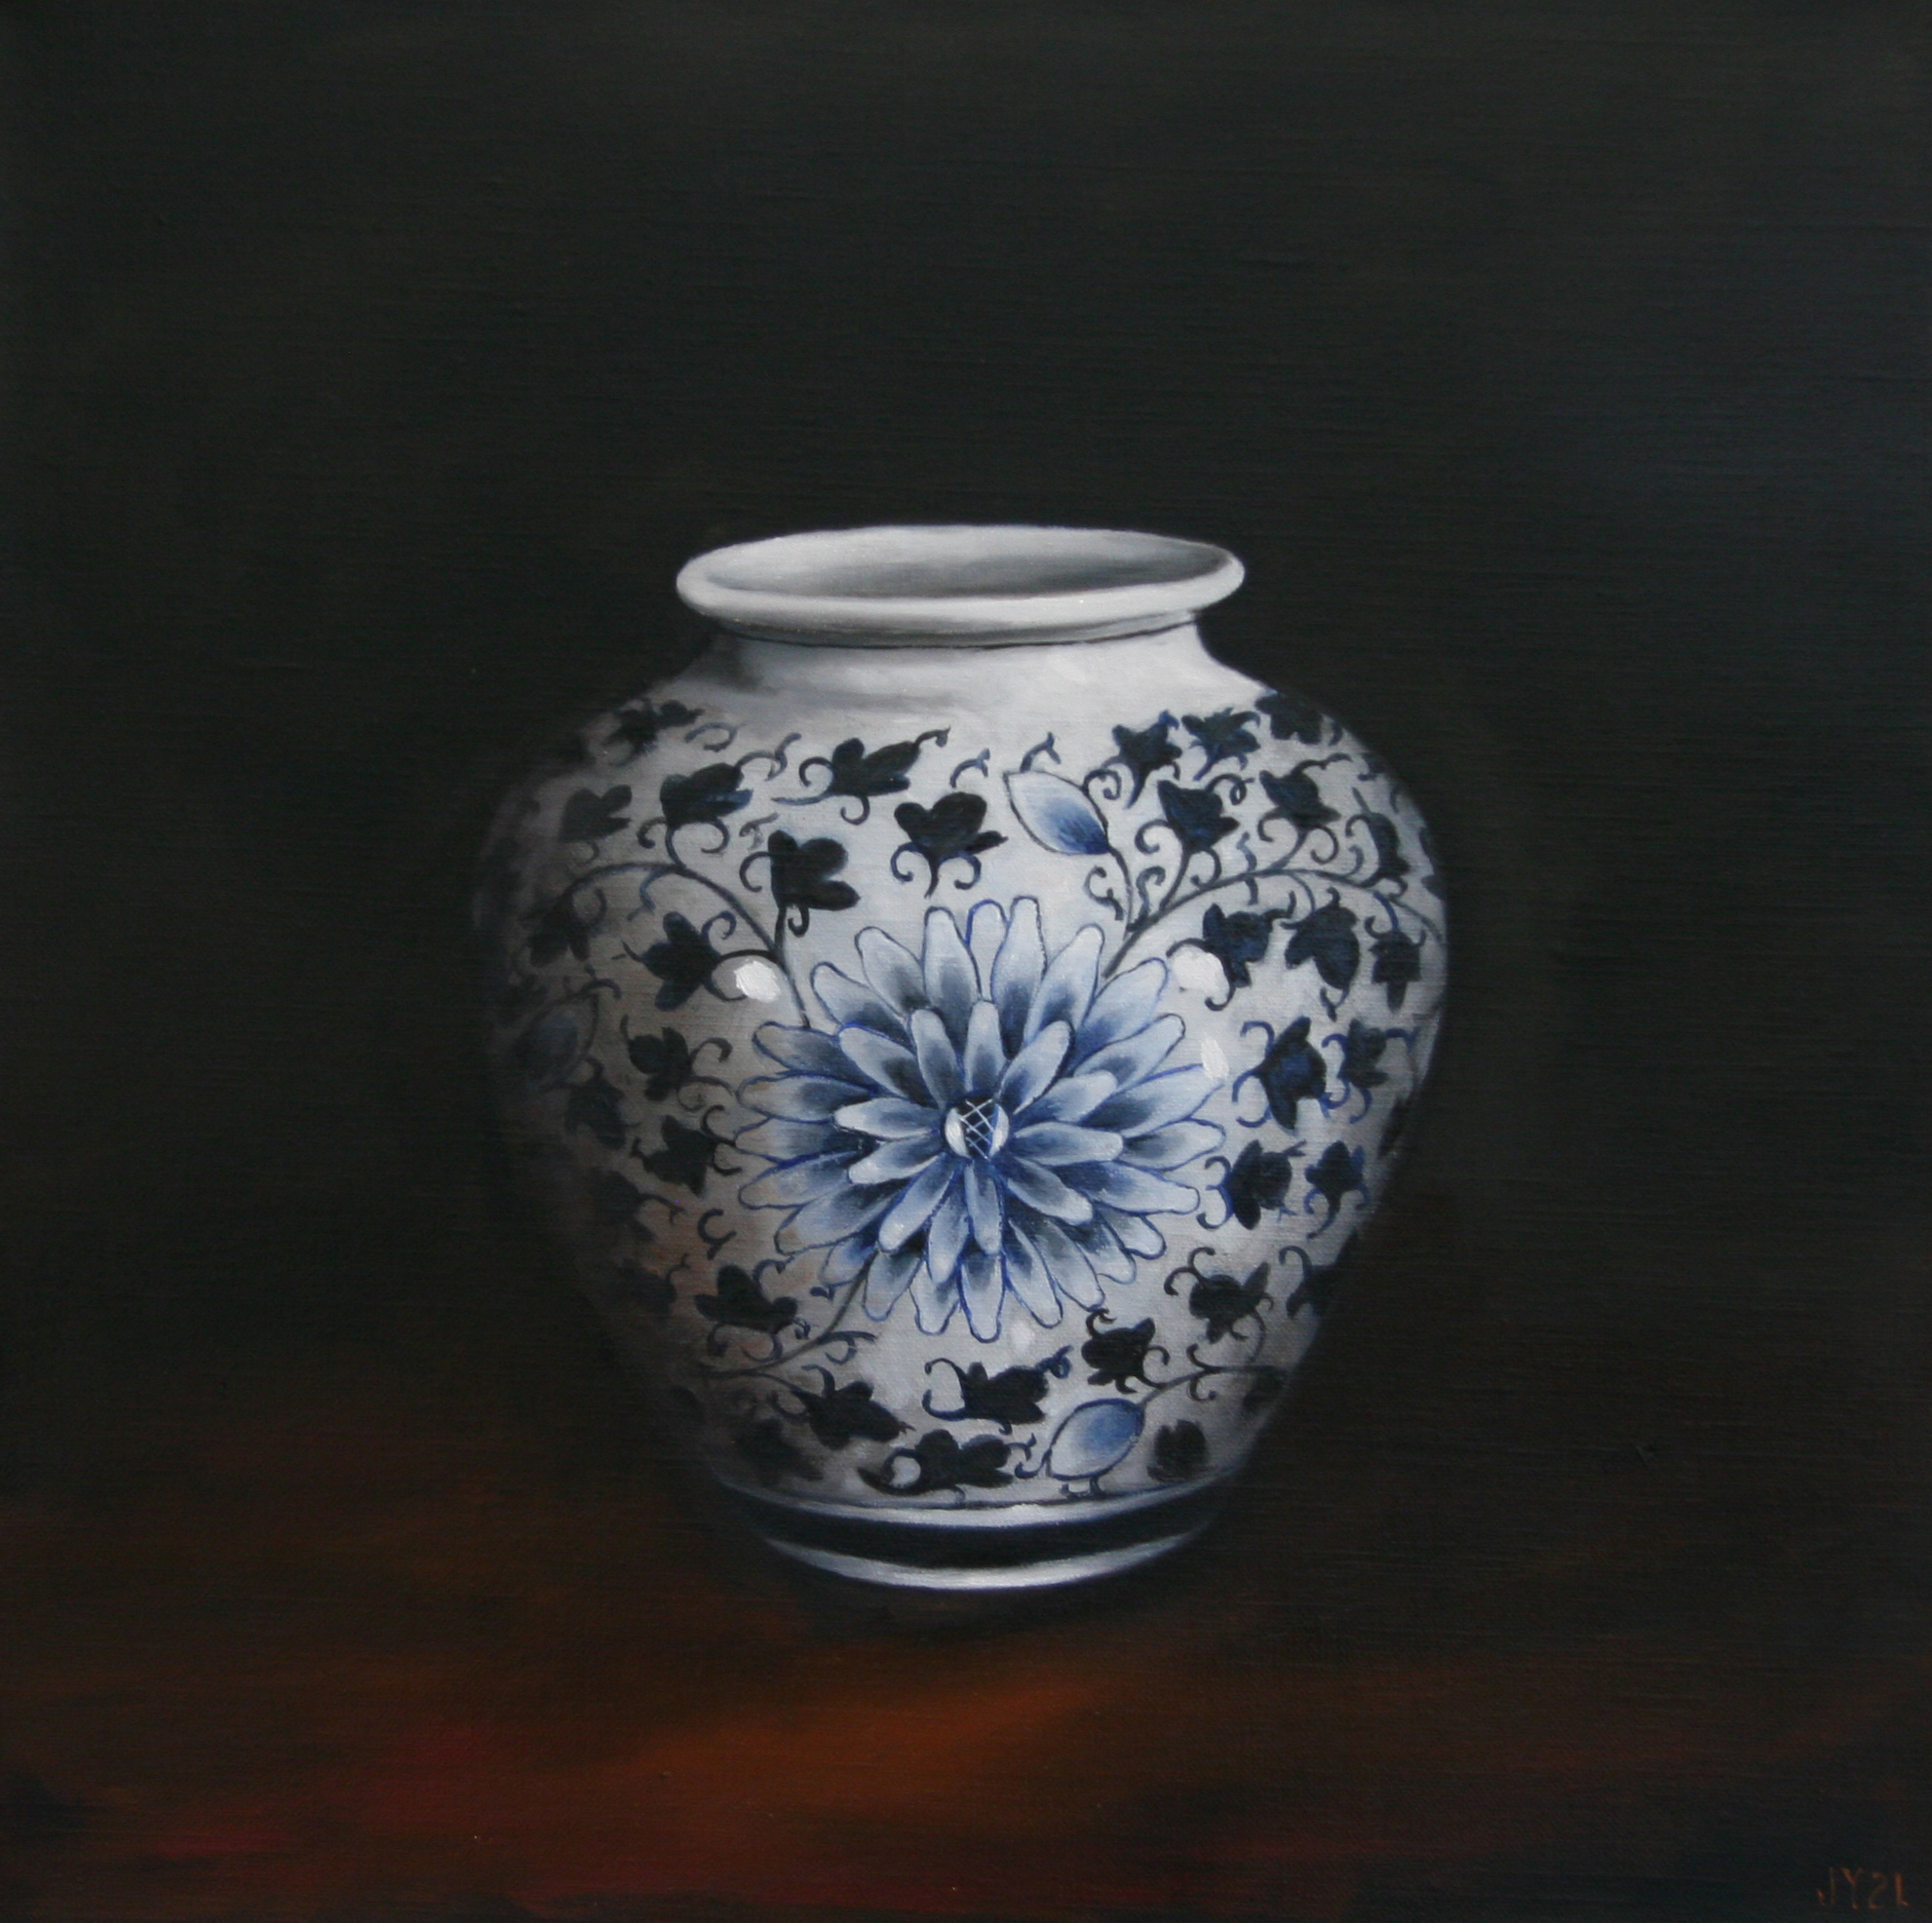 Young_Vessel Entwined No 2_oil on linen_40 x 40cm